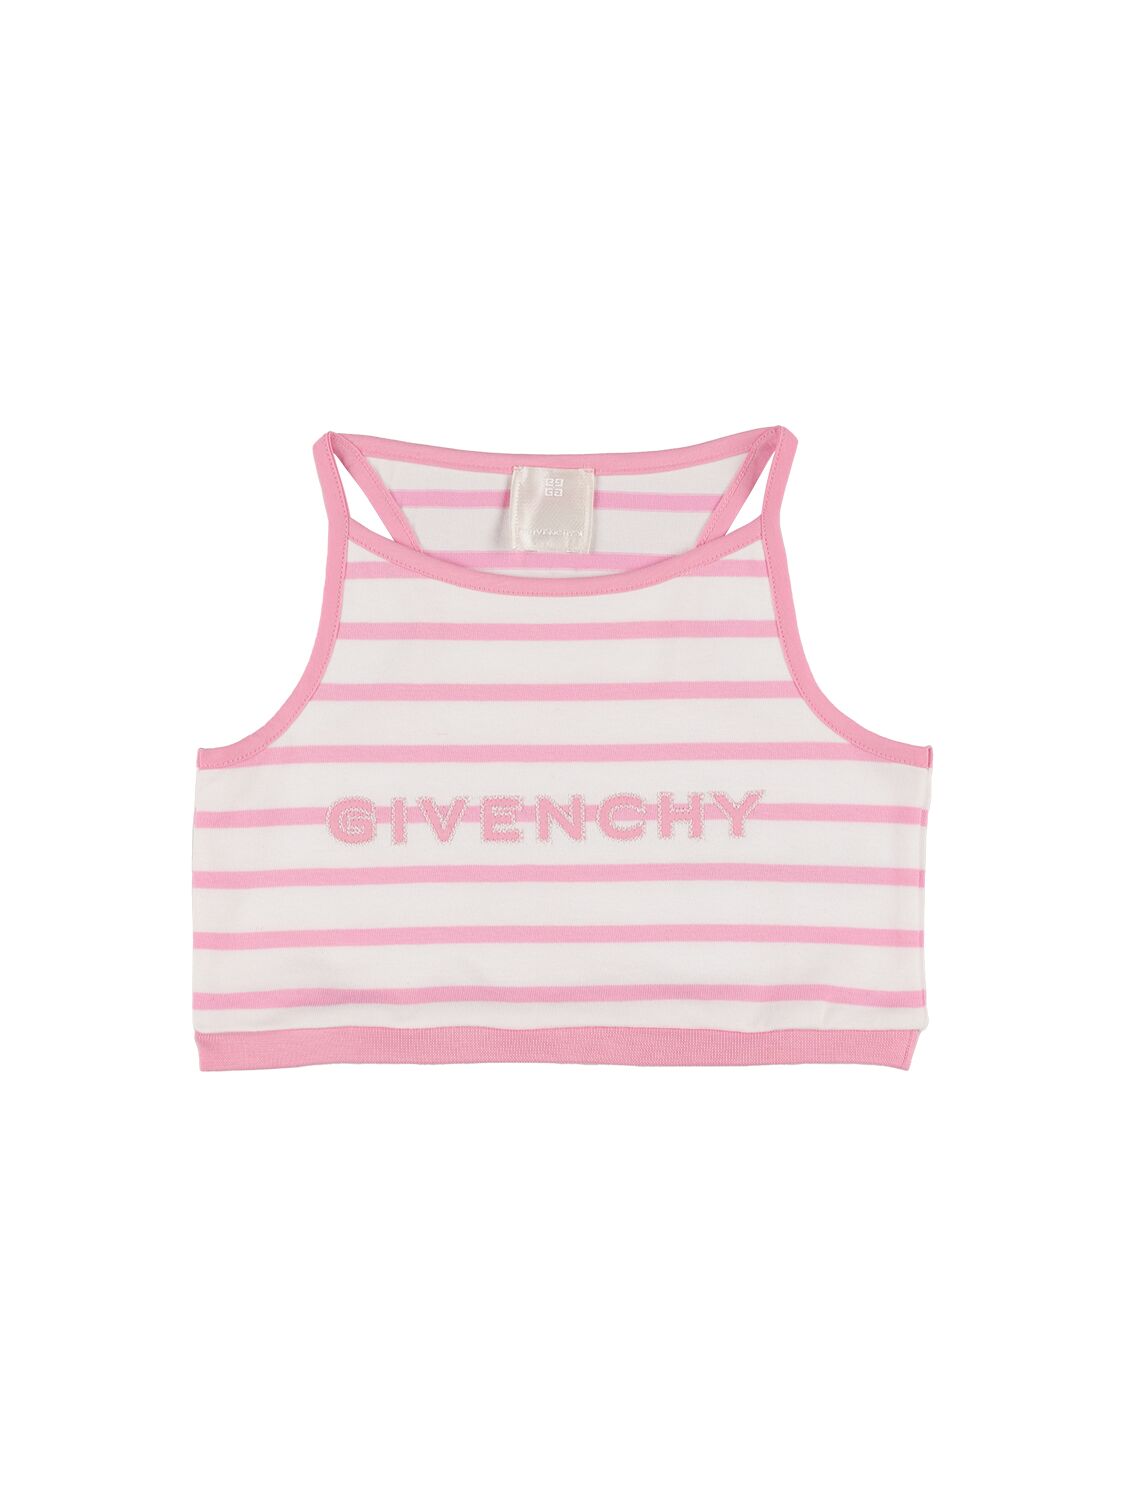 Givenchy Striped Cotton Jersey Tank Top In White/pink